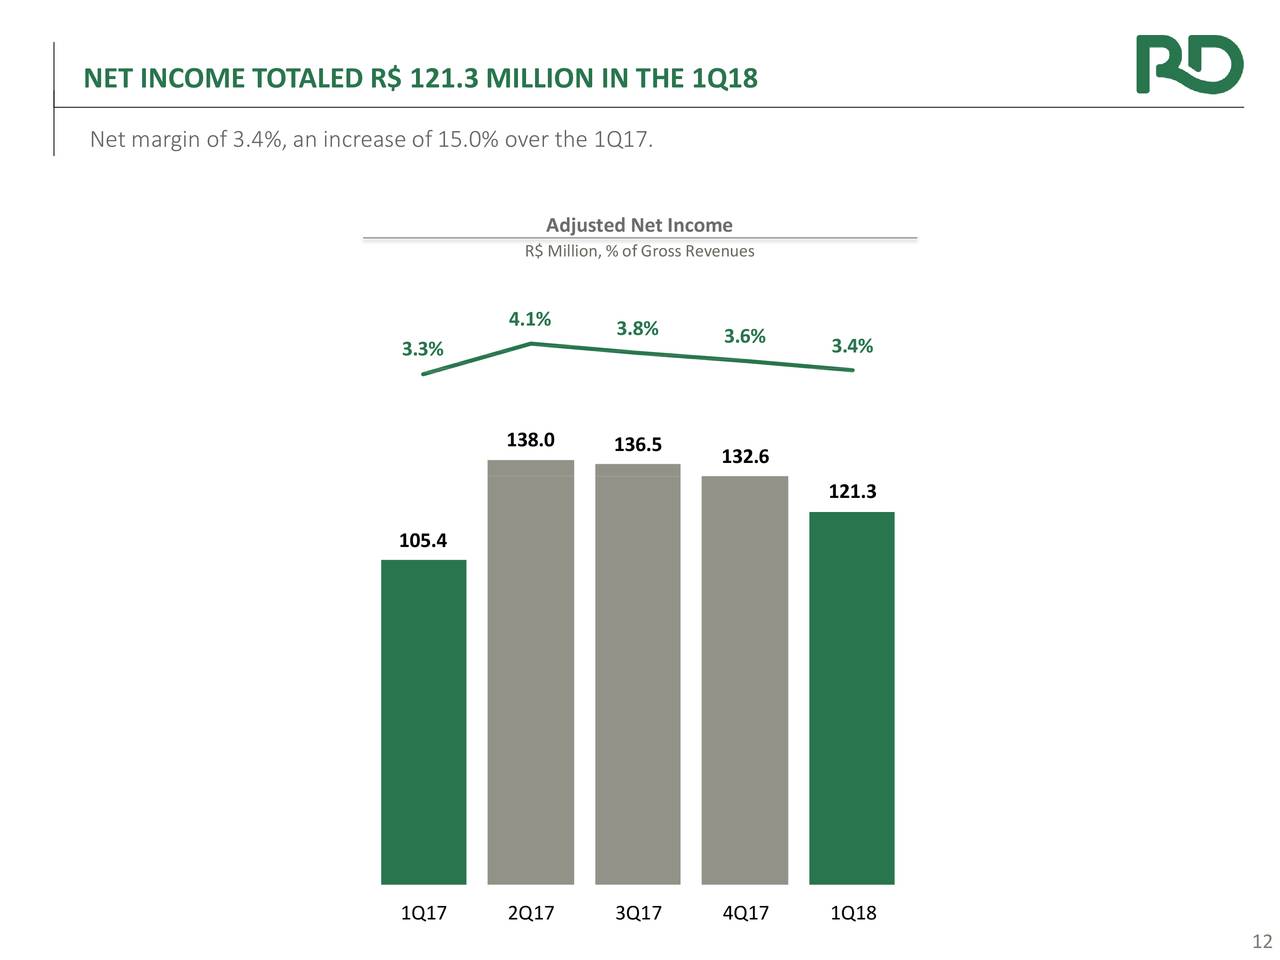 NET INCOME TOTALED R$ 121.3 MILLION IN THE 1Q18